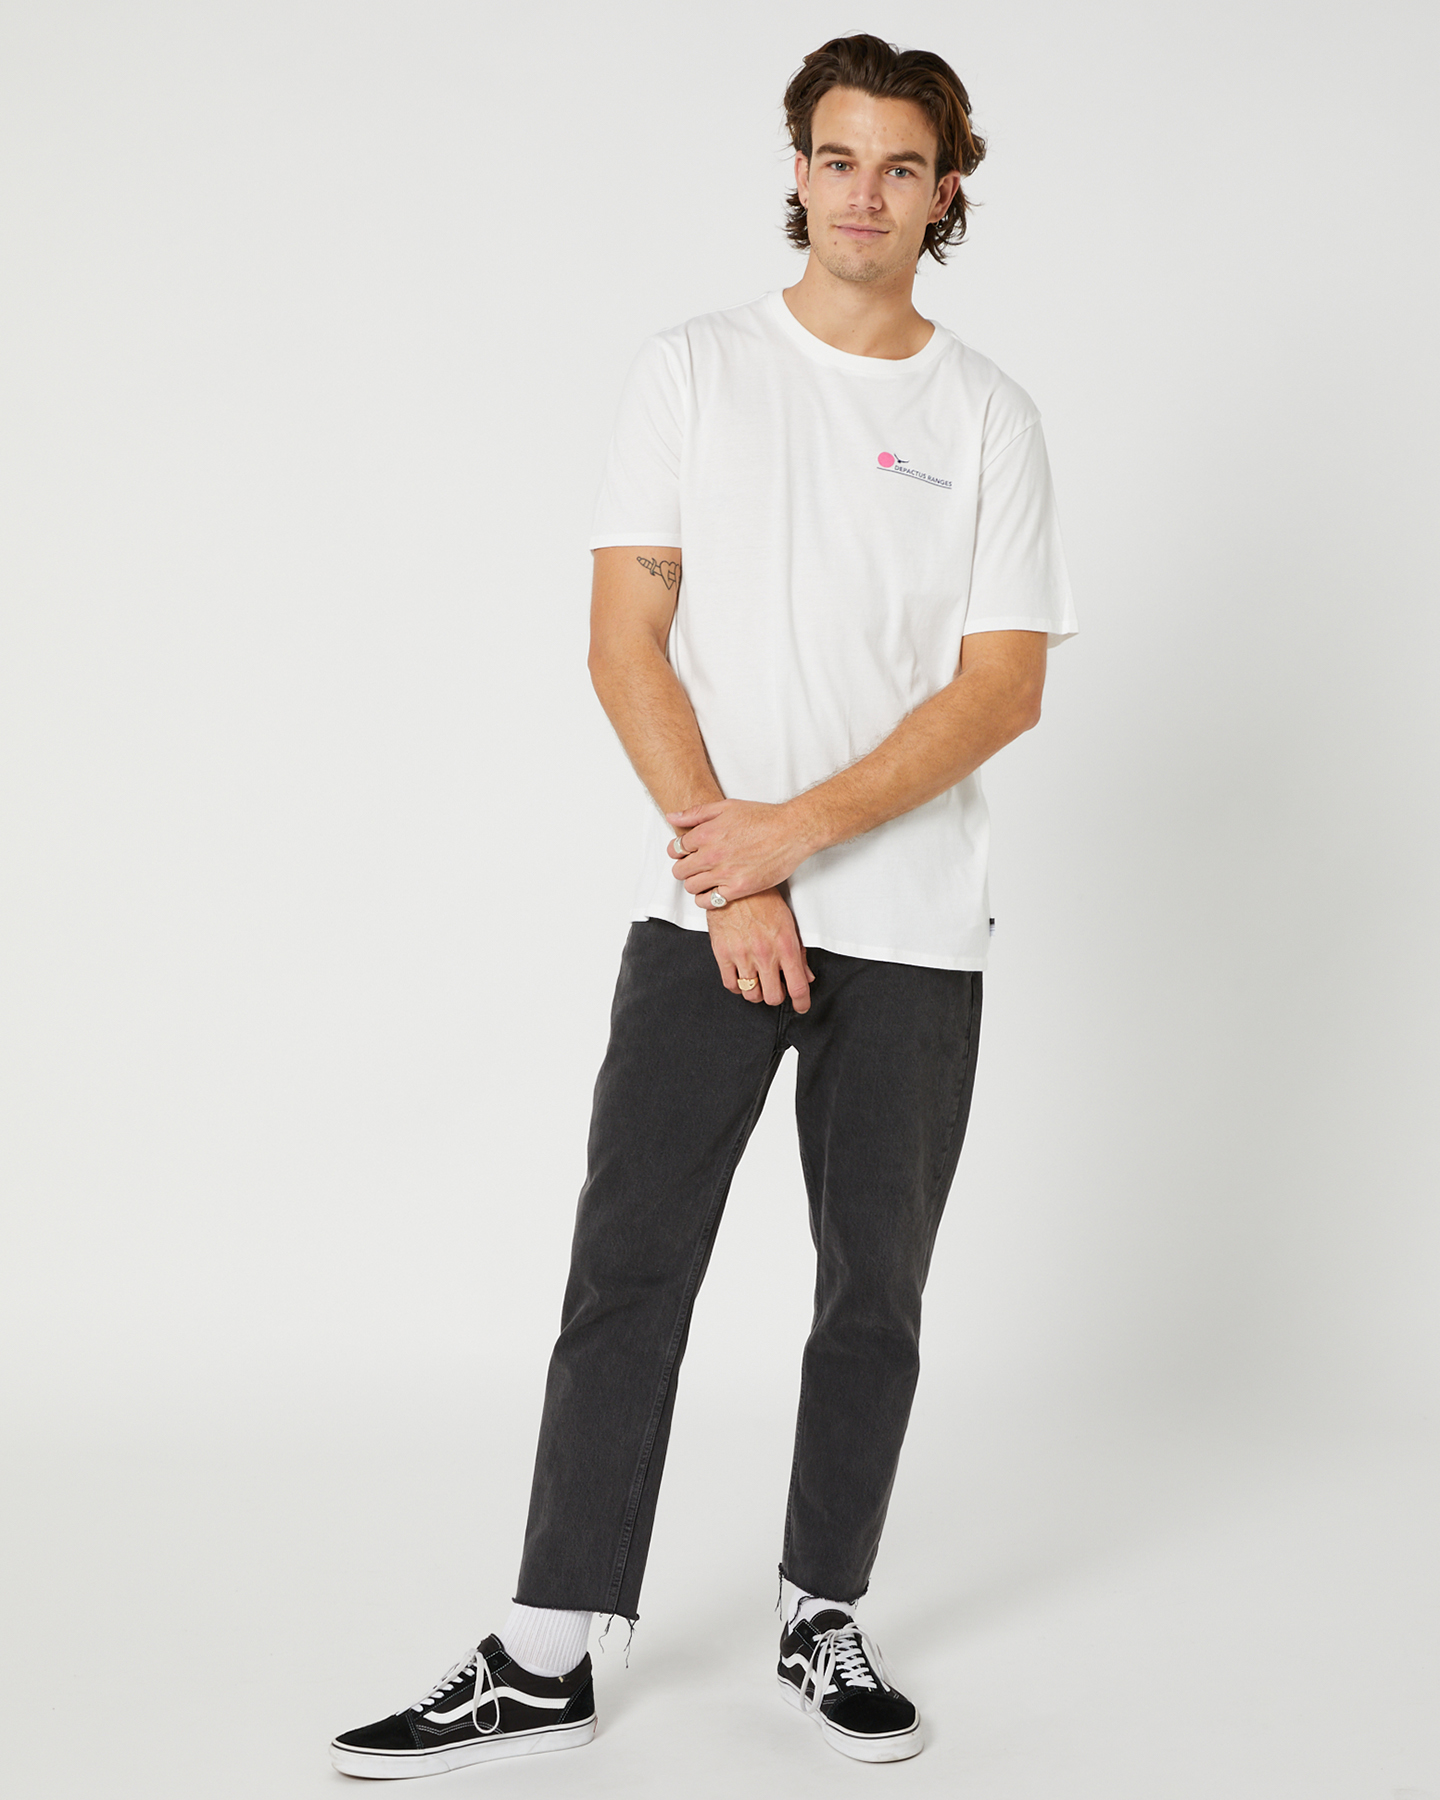 Depactus Ranges Ss Tee - Off White | SurfStitch